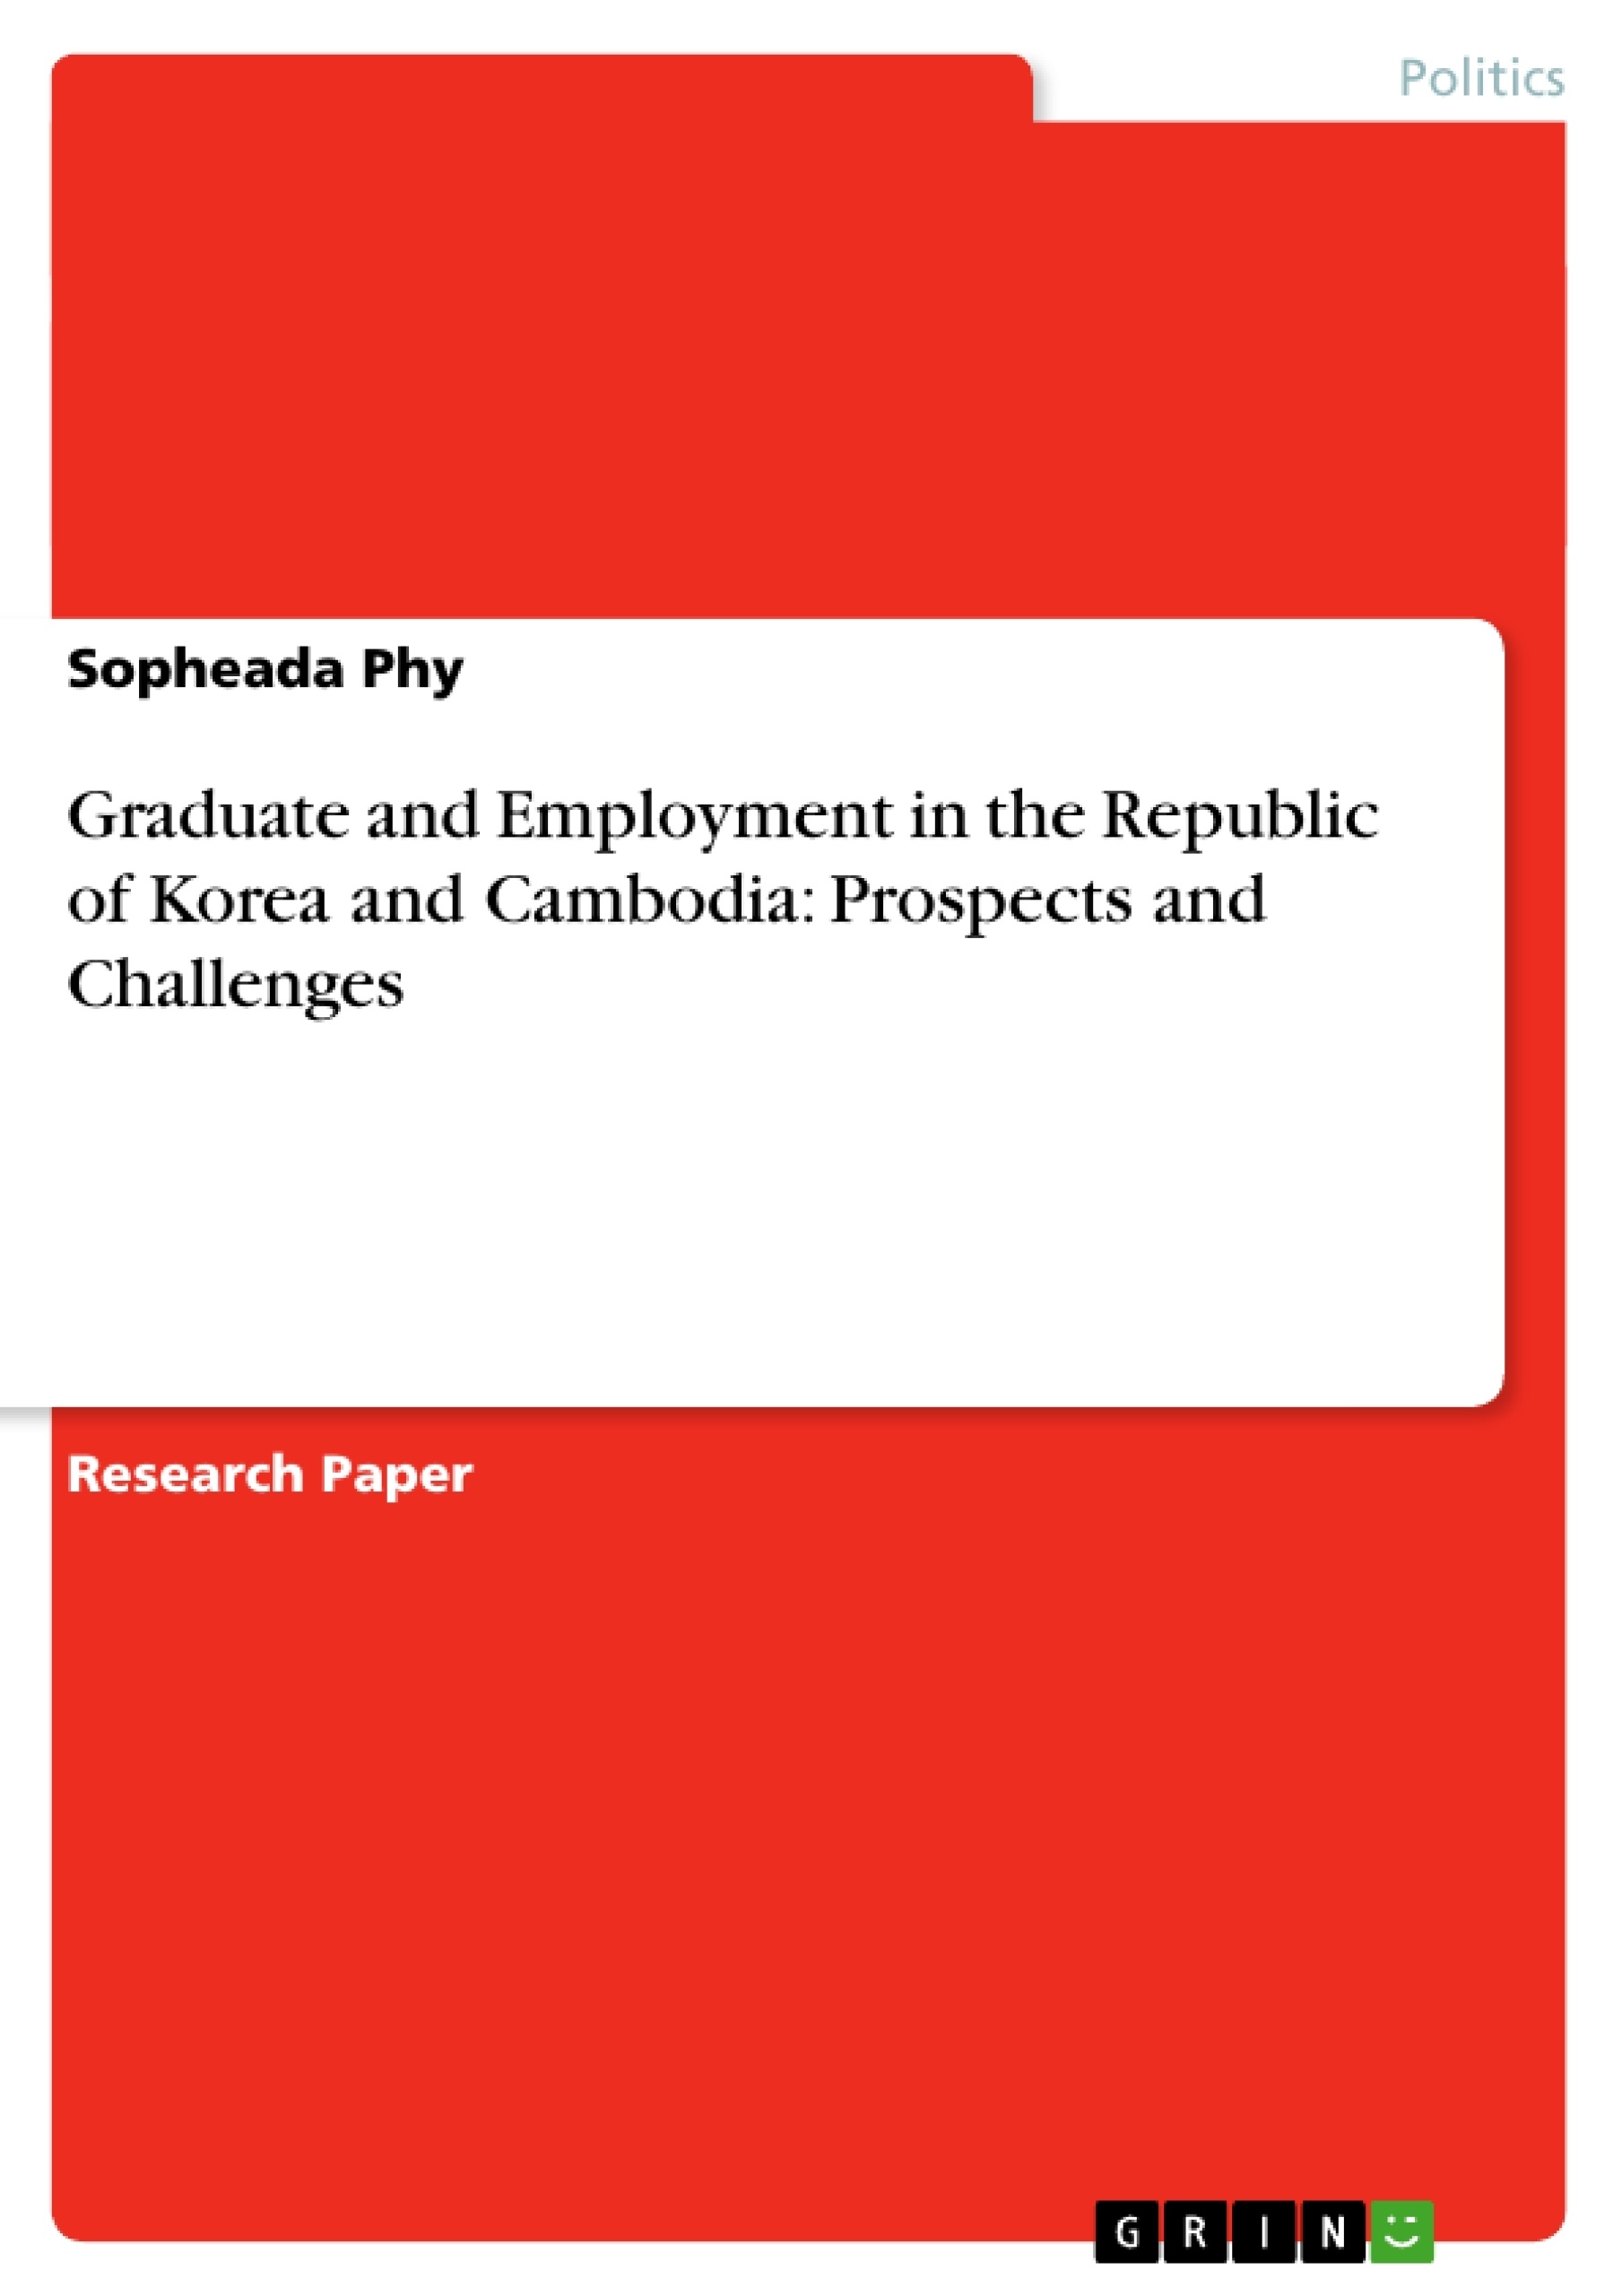 Title: Graduate and Employment in the Republic of Korea and Cambodia: Prospects and Challenges 